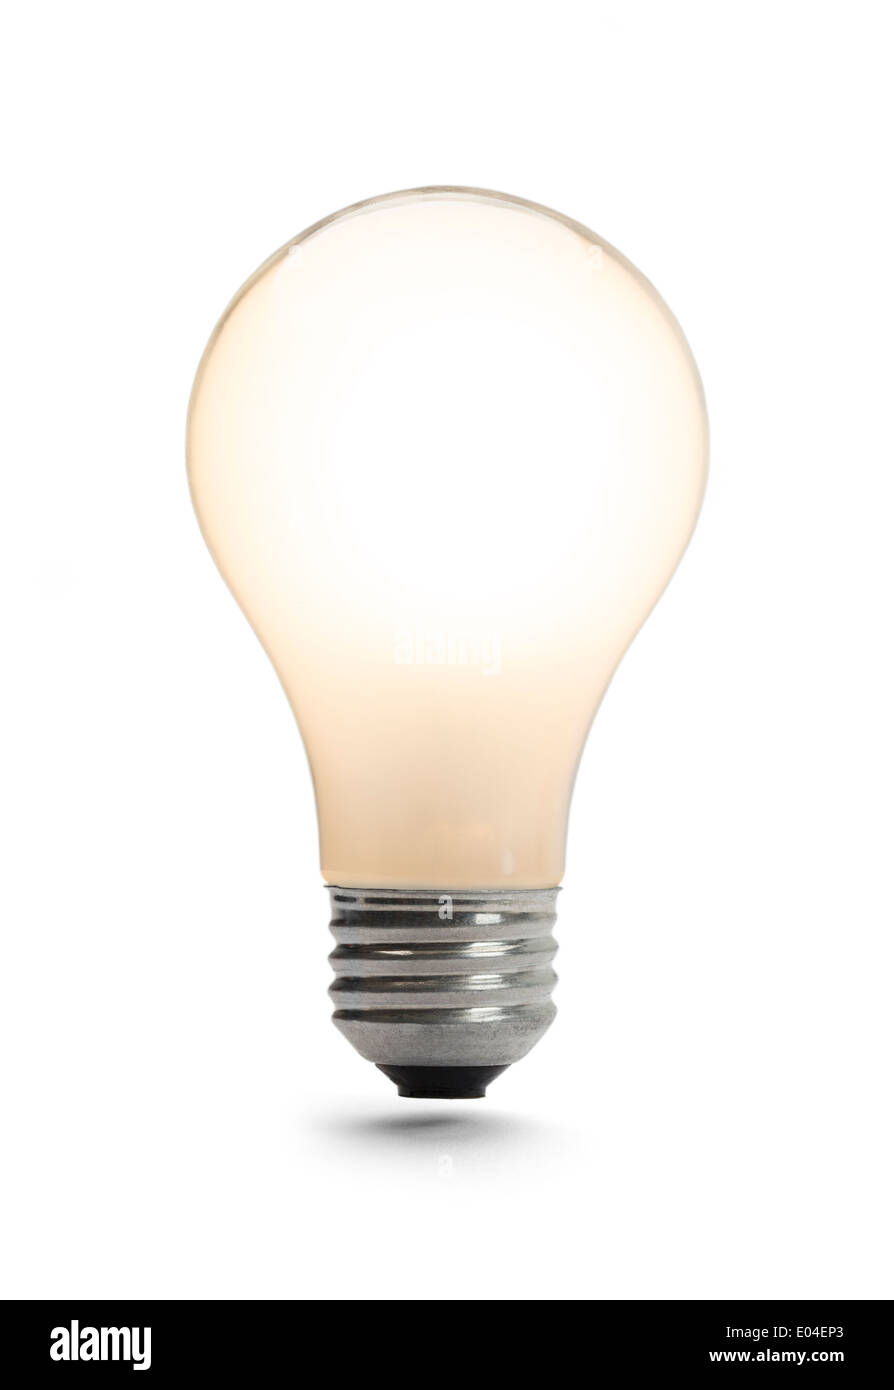 Classic Light Bulb Lit Up Isolated on a White Background. Stock Photo